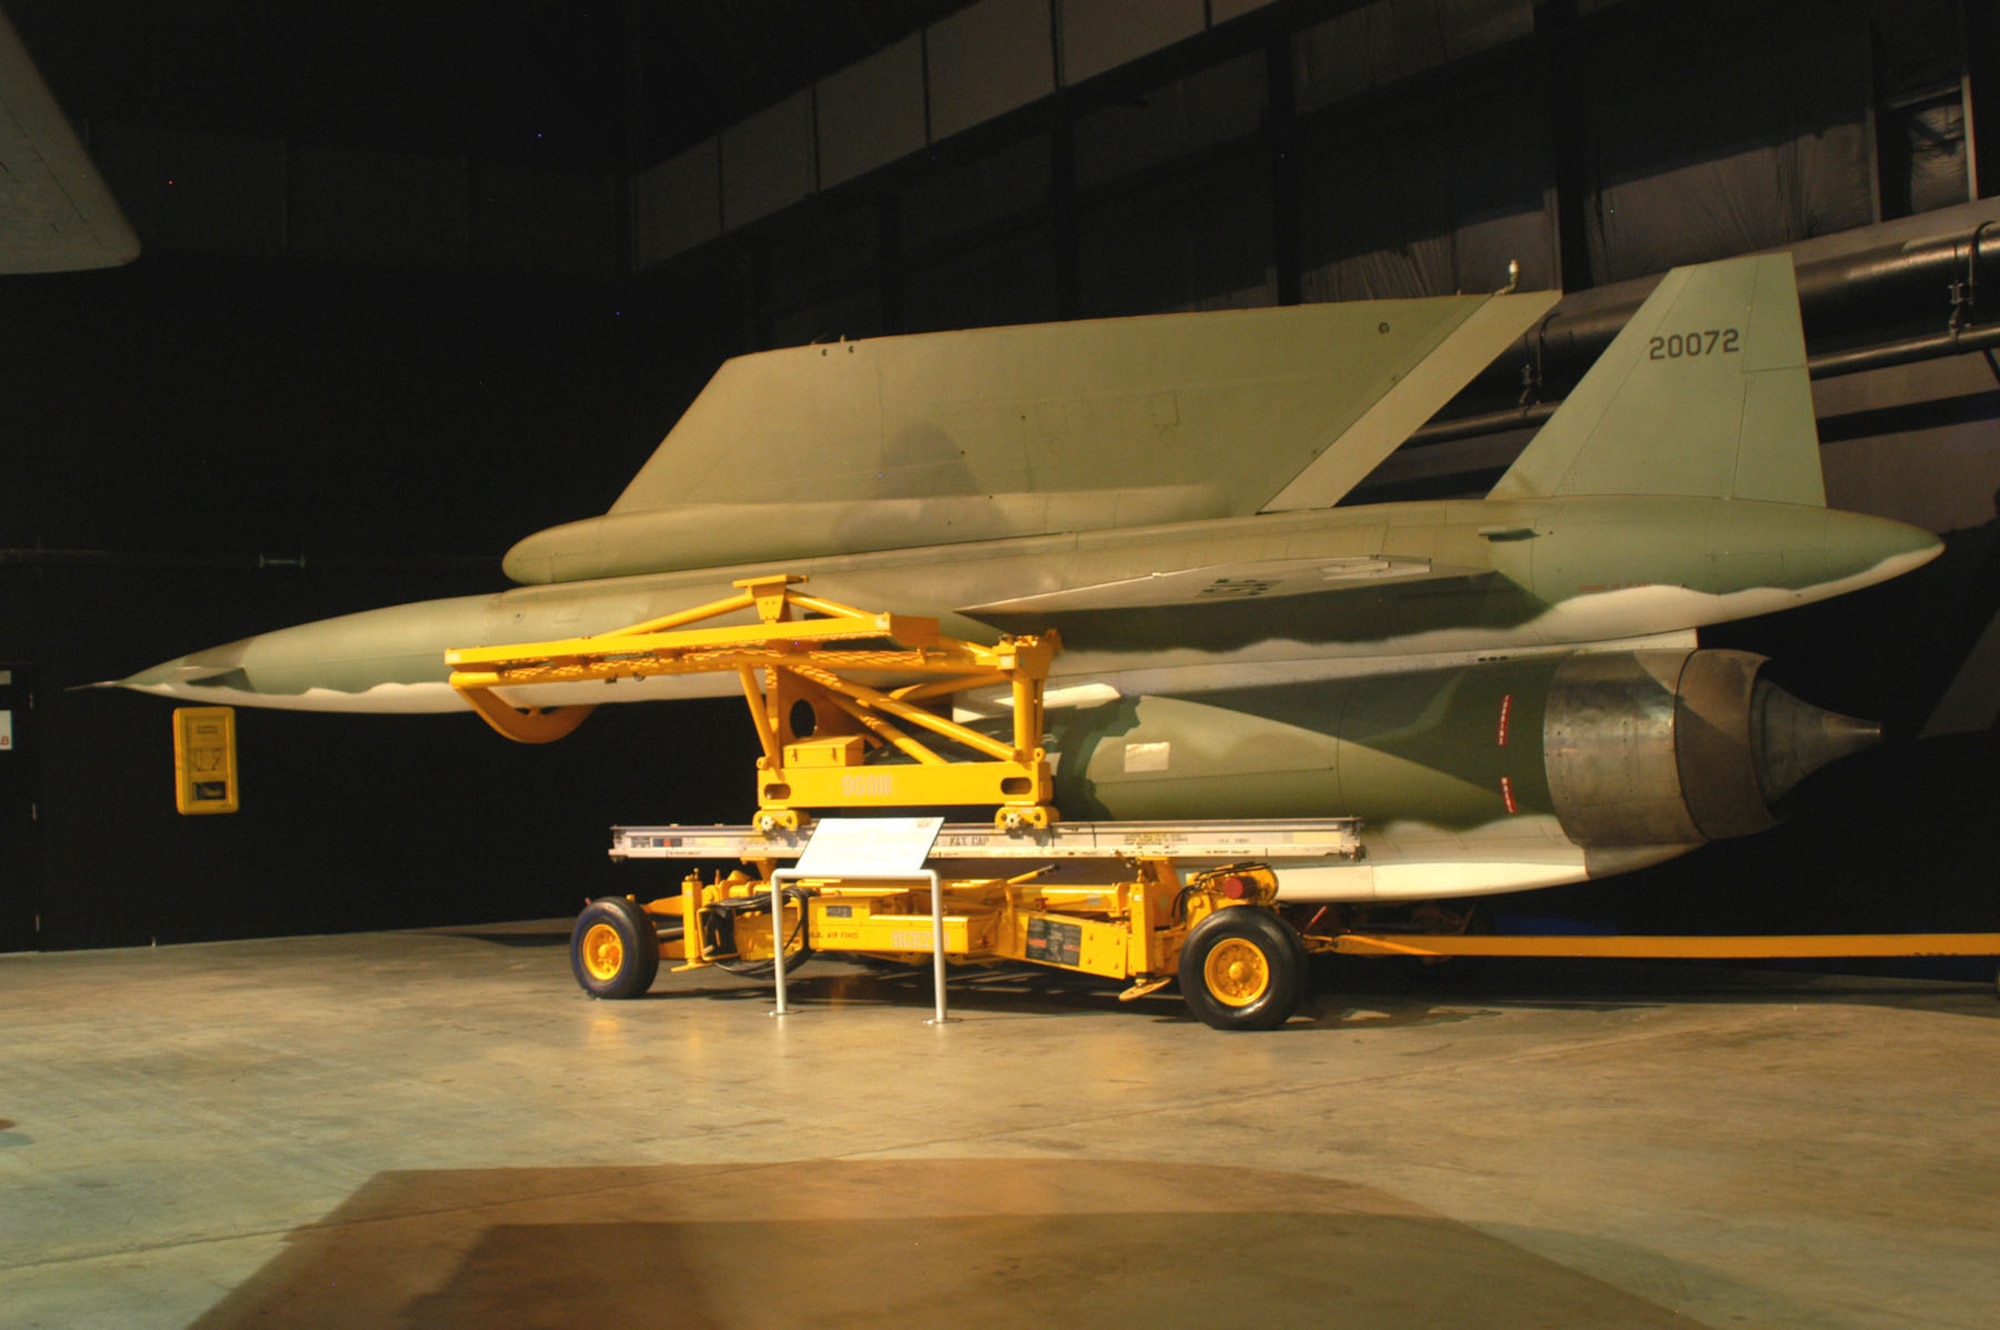 DAYTON, Ohio -- North American AGM-28B Hound Dog in the Cold War Gallery at the National Museum of the United States Air Force. (U.S. Air Force photo)